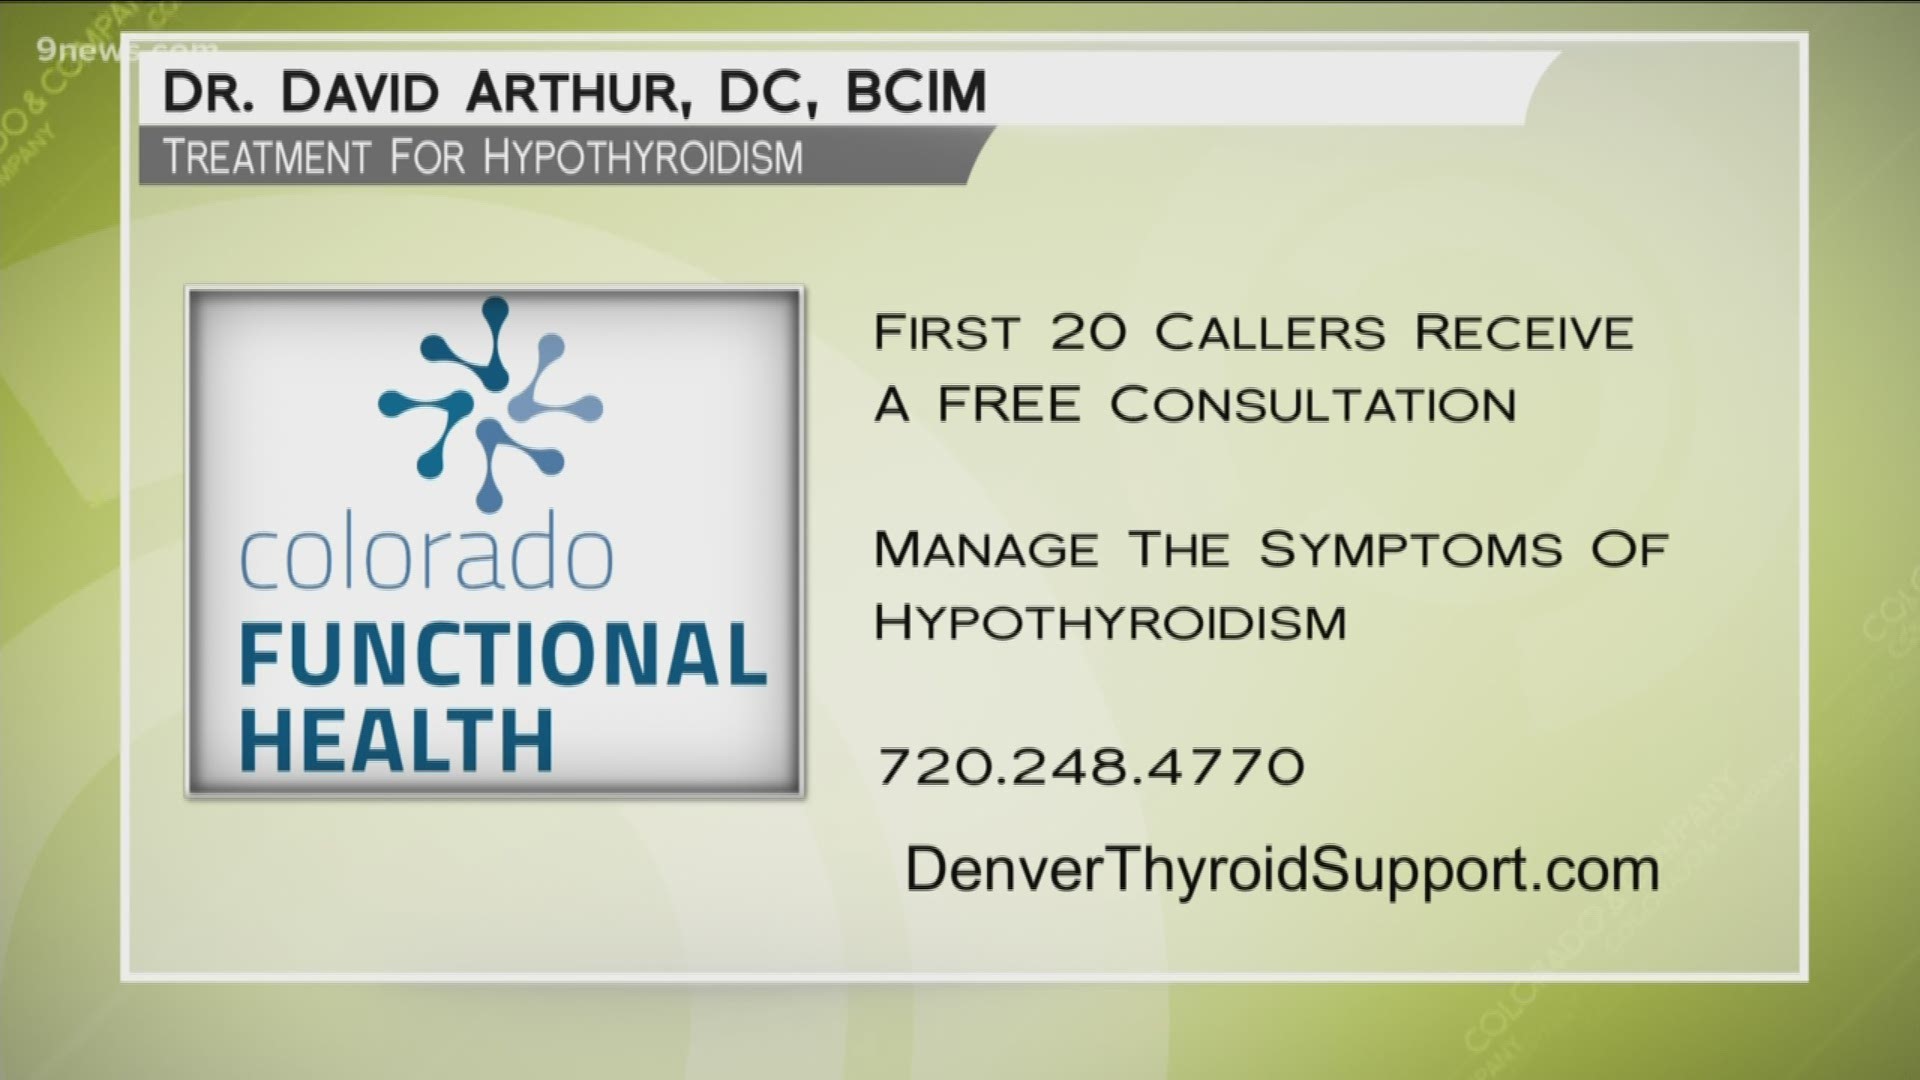 Mention COCO when you call 720.248.4770 and set up a consultation with Dr. Arthur. Learn more about taking control of your thyroid issues at DenverThyroidSupport.com